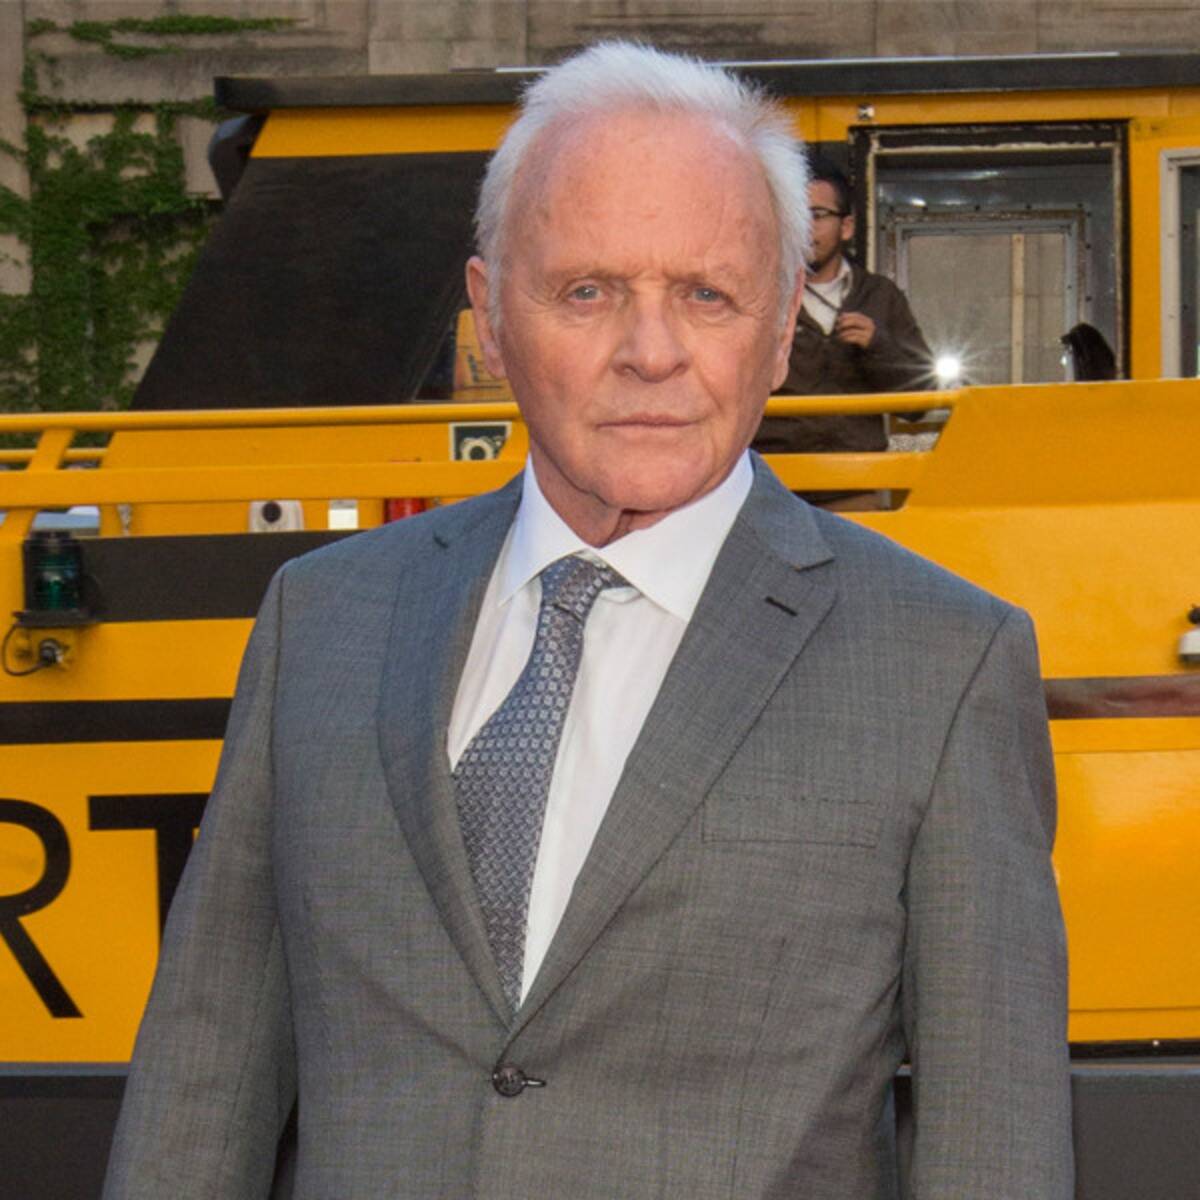 Why Best Actor Winner Anthony Hopkins Skipped the 2021 Oscars